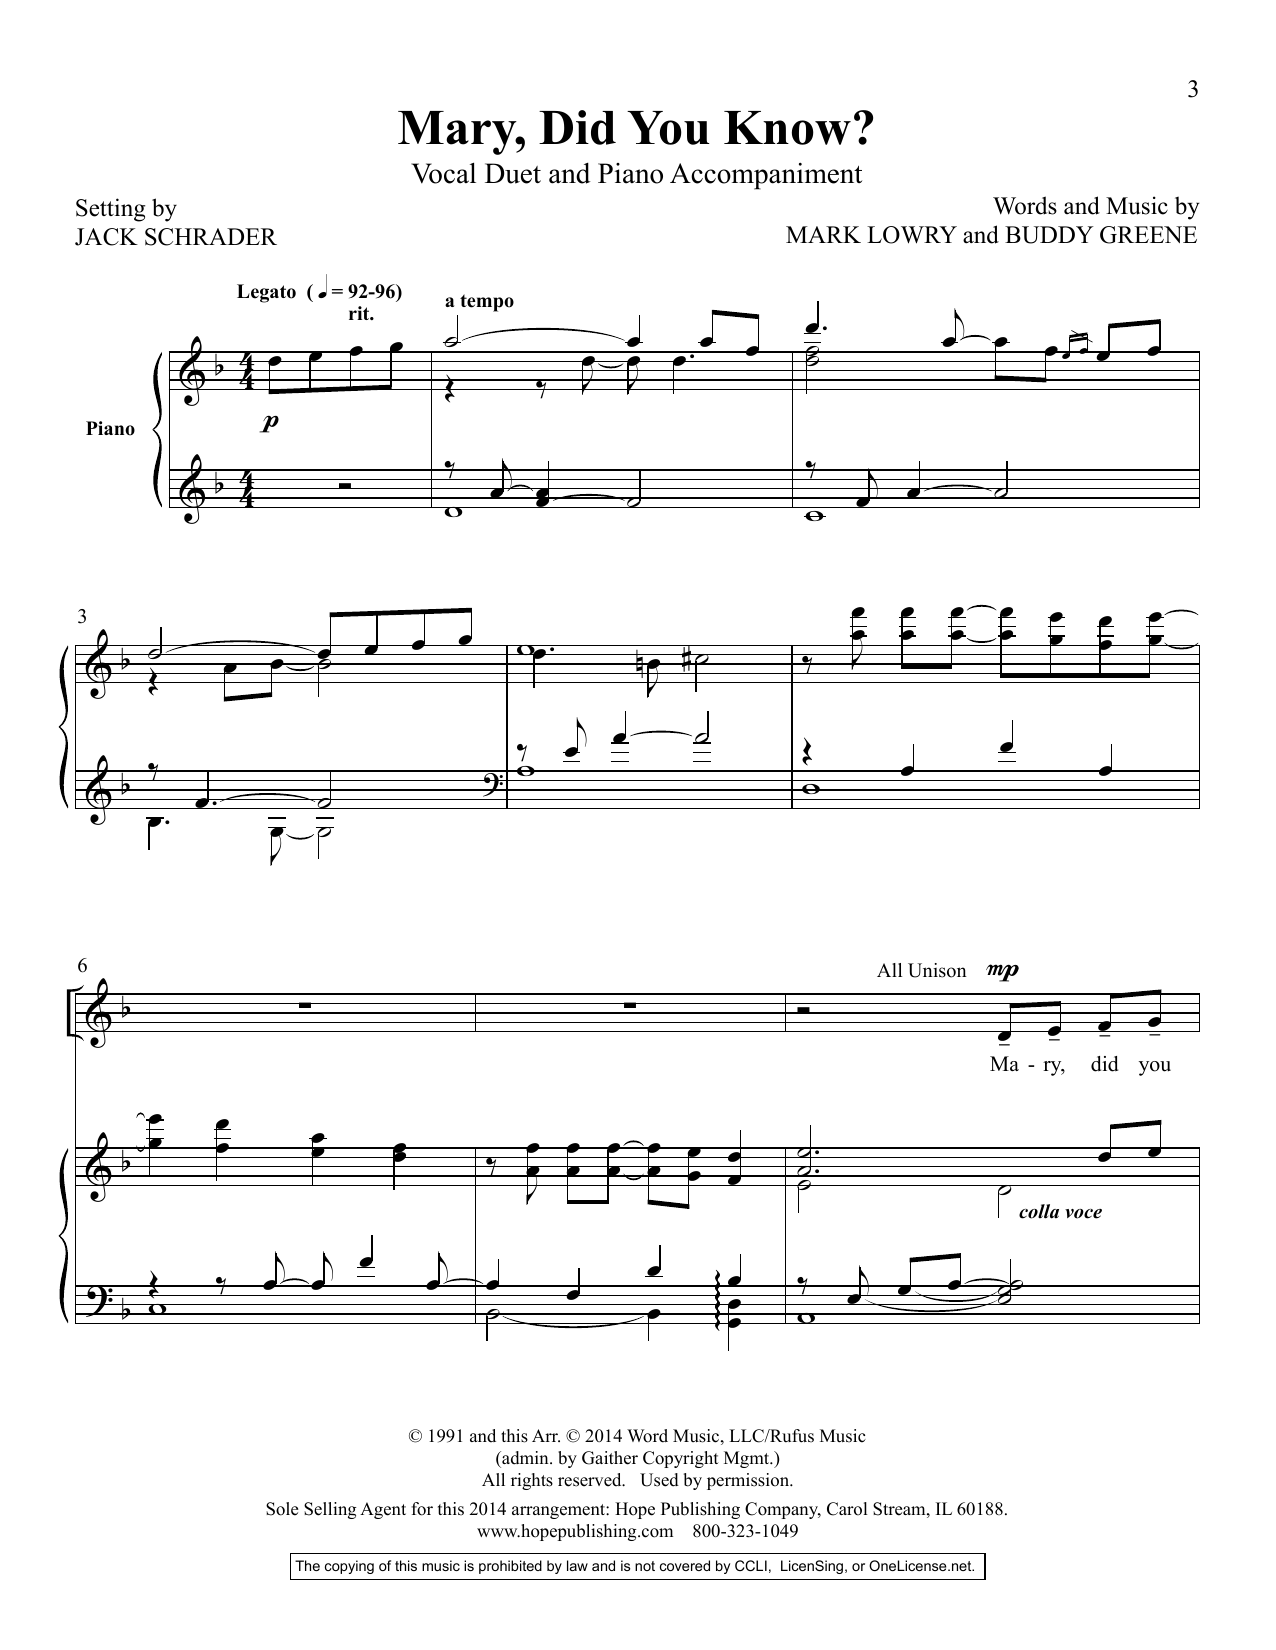 Download Buddy Greene Mary, Did You Know? Sheet Music